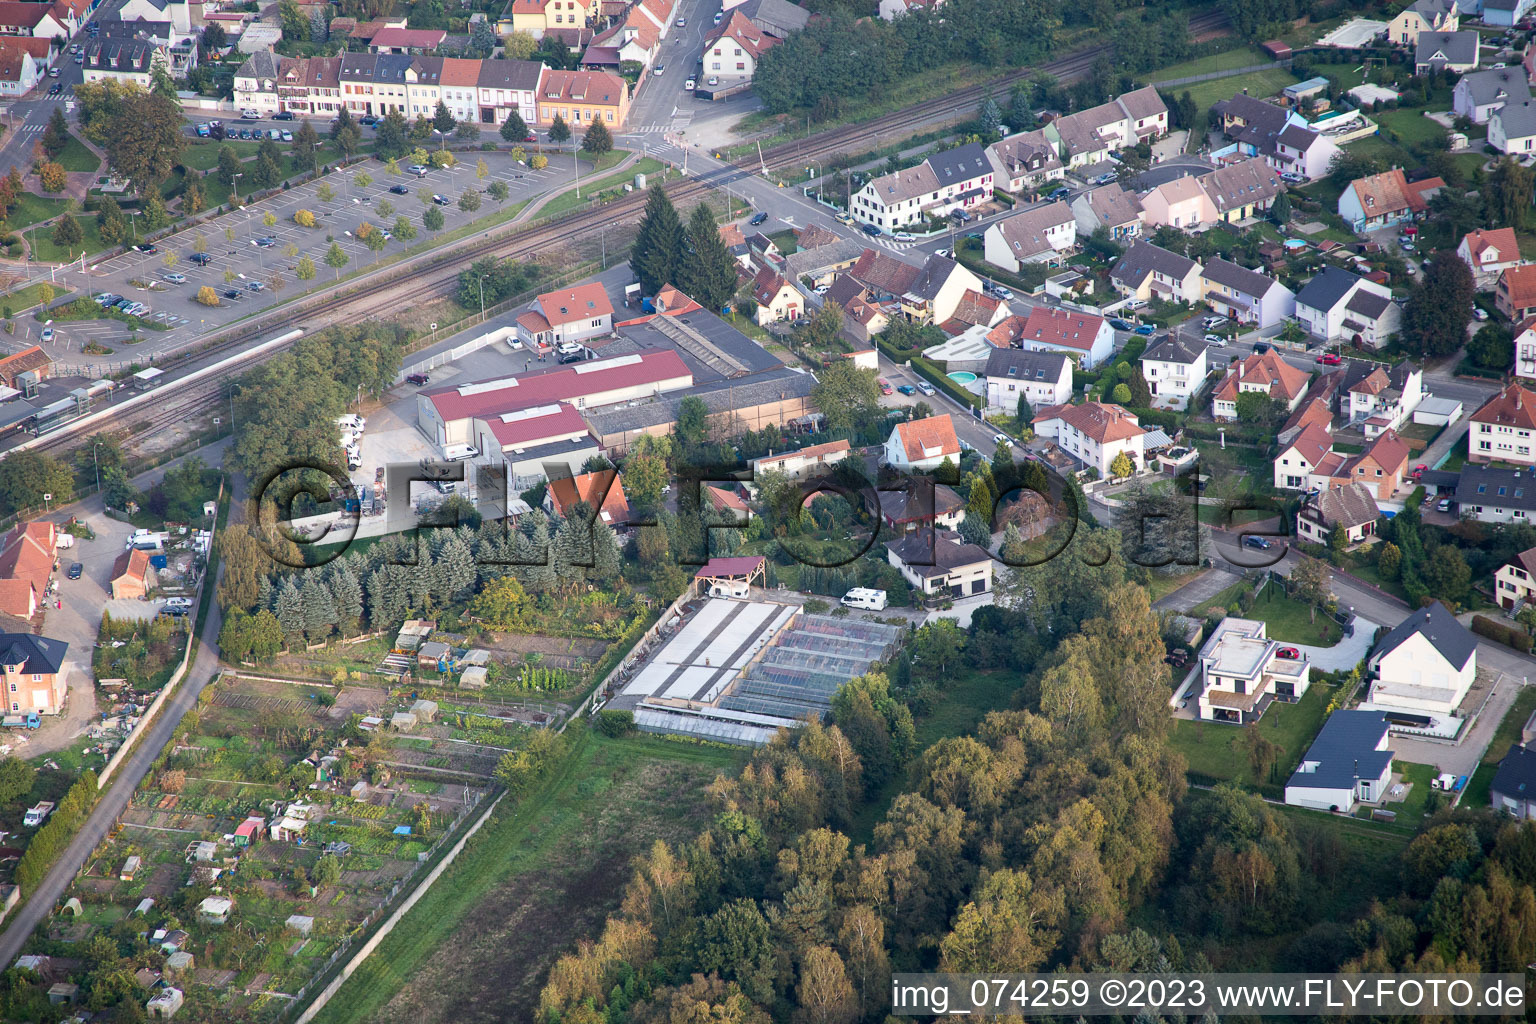 Drone image of Bischwiller in the state Bas-Rhin, France